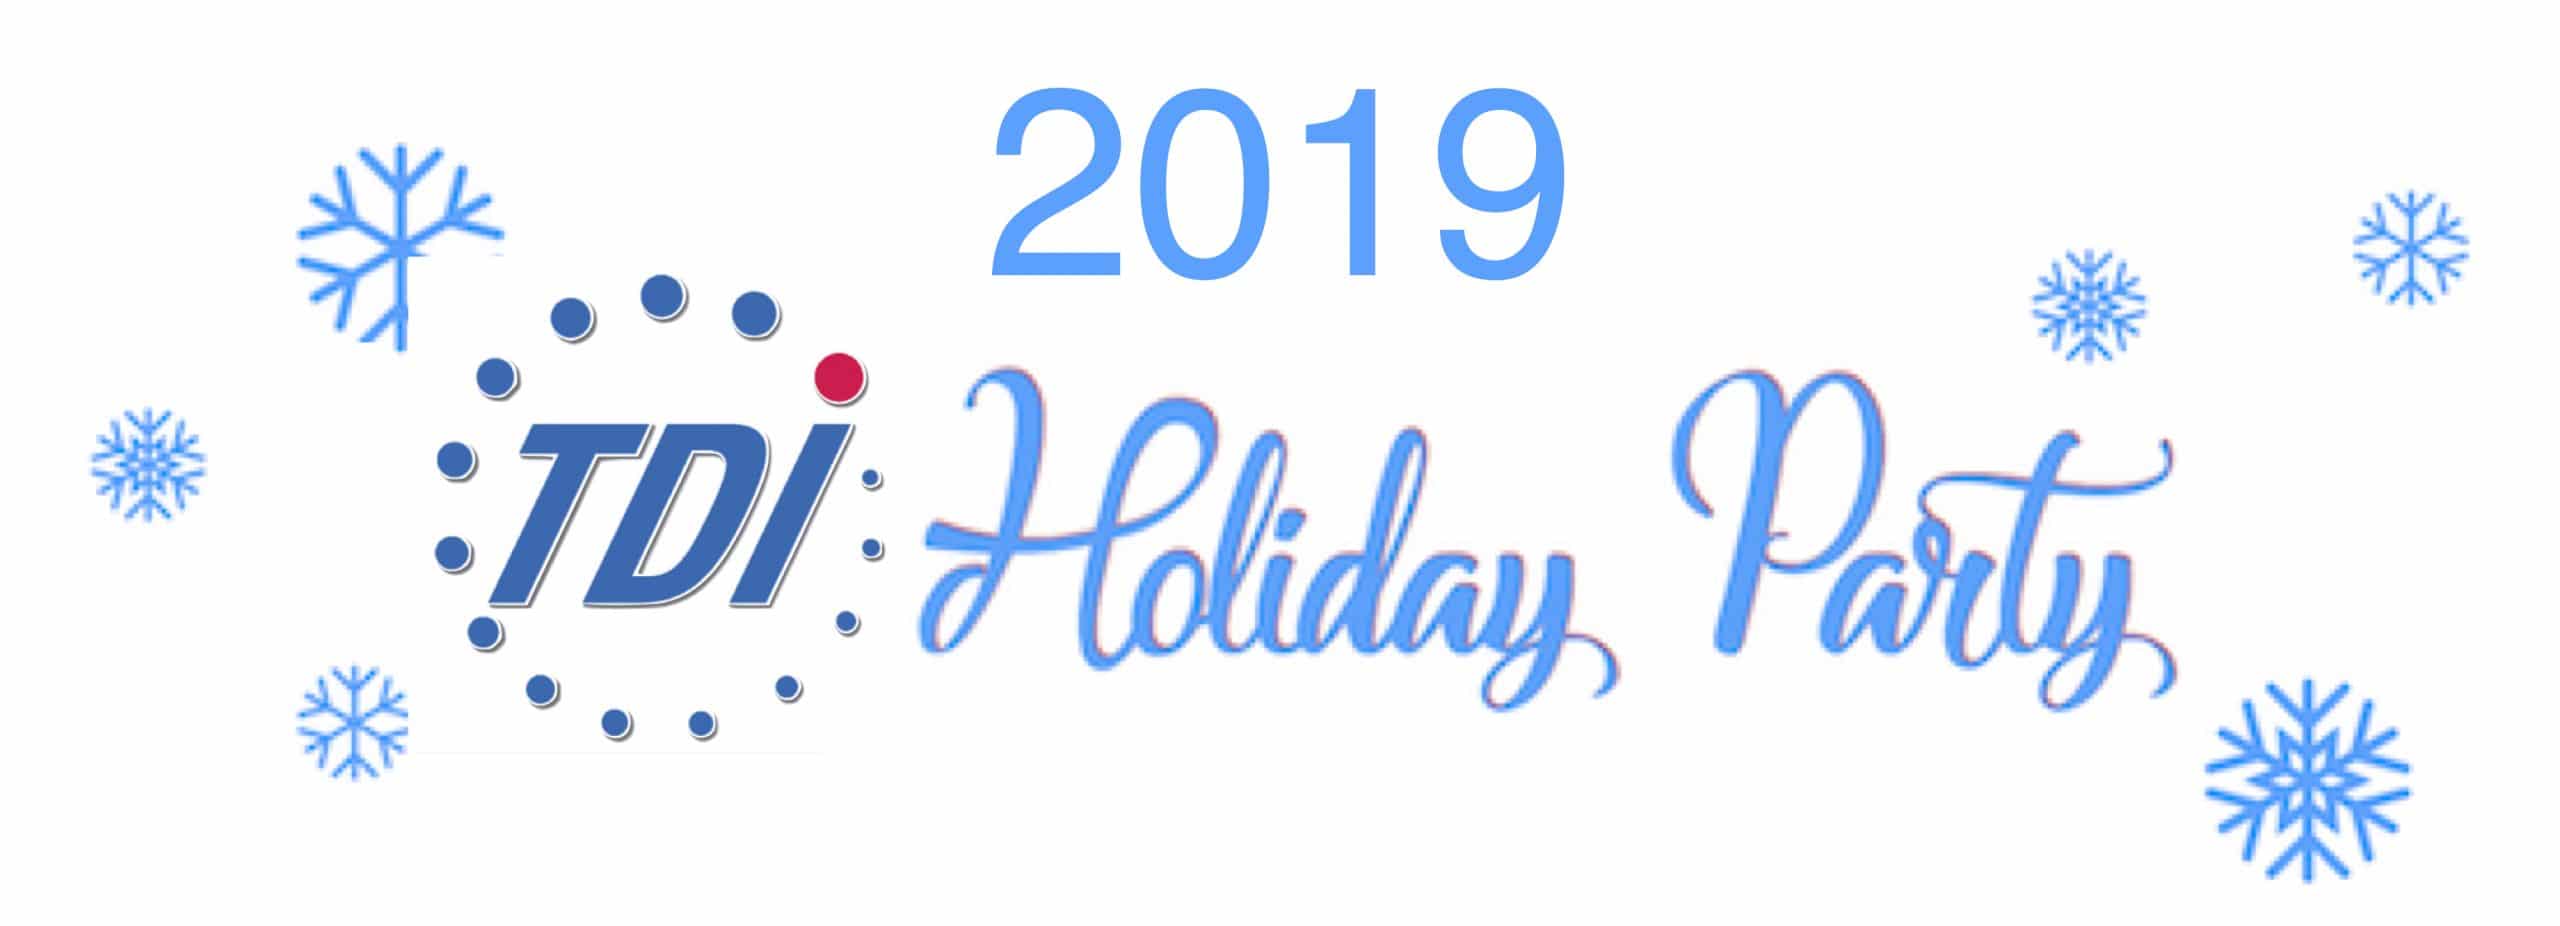 2019 (TDI logo) Holiday Party in blue cursive print with snowflakes